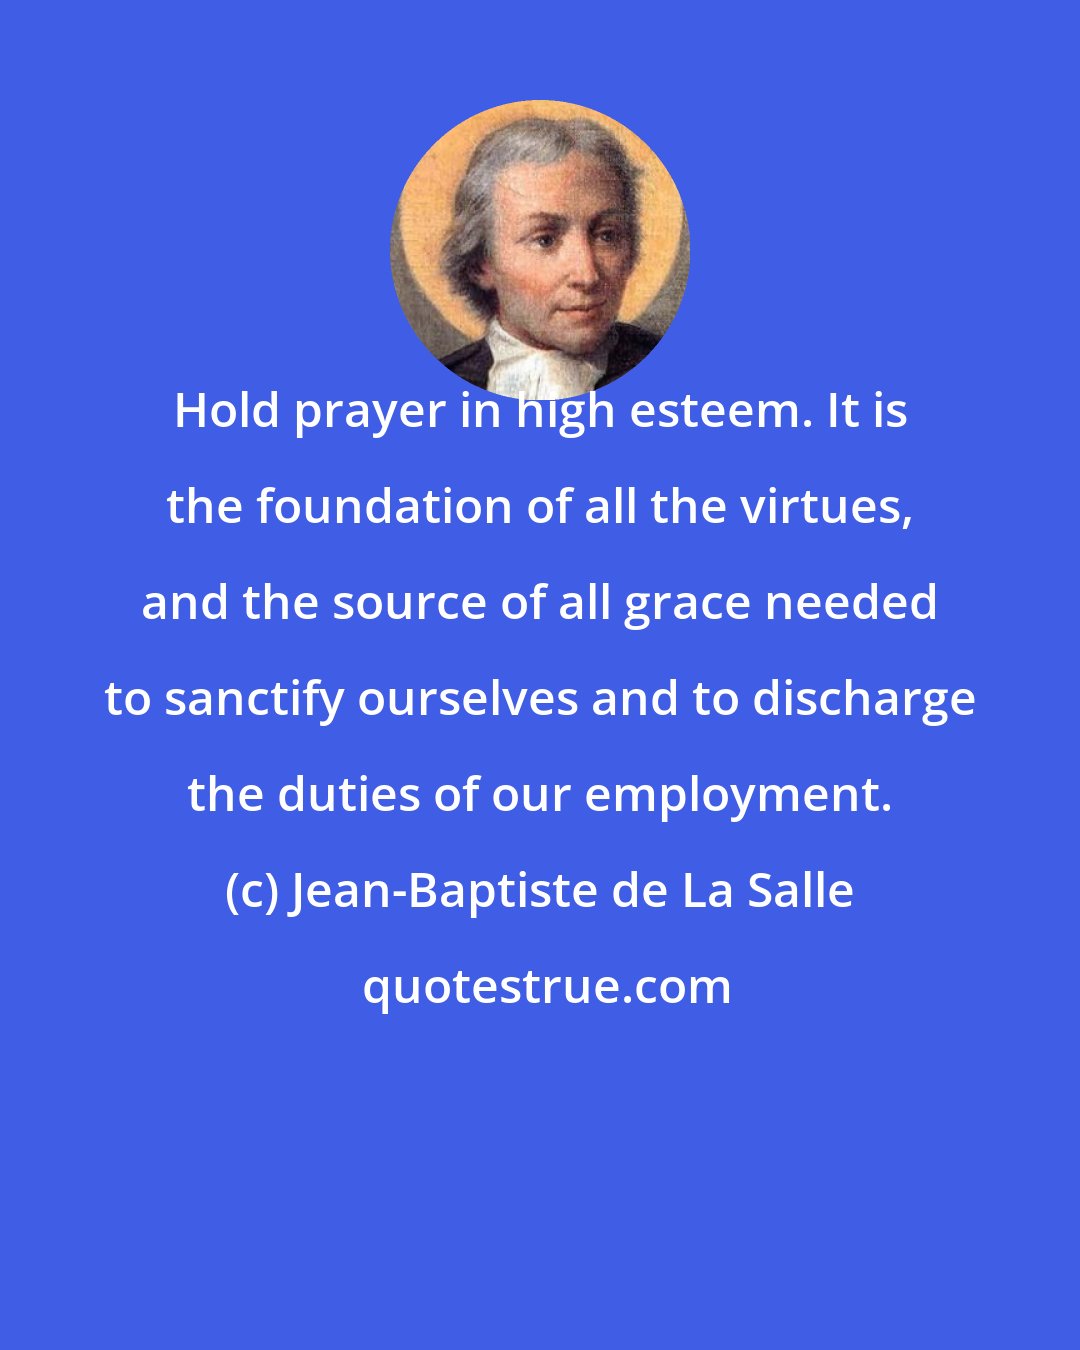 Jean-Baptiste de La Salle: Hold prayer in high esteem. It is the foundation of all the virtues, and the source of all grace needed to sanctify ourselves and to discharge the duties of our employment.